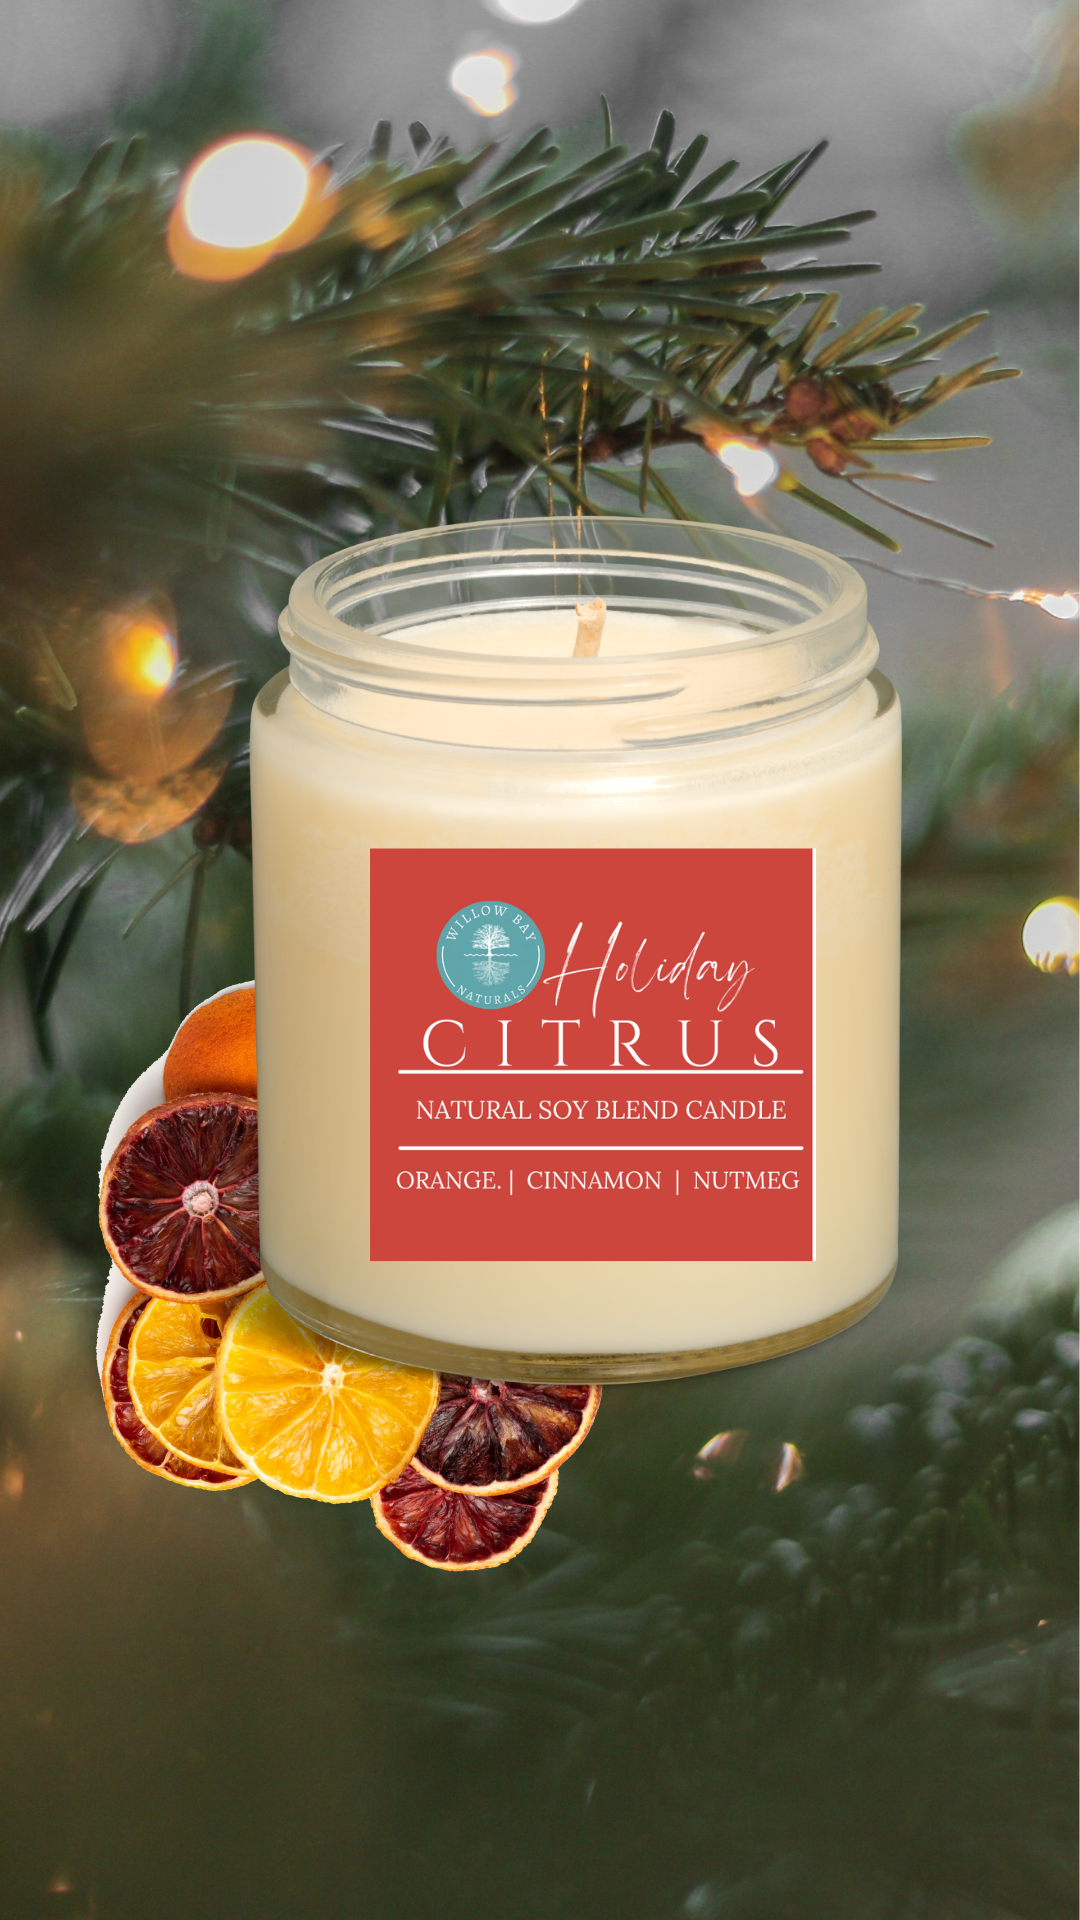 Holiday Citrus Candle